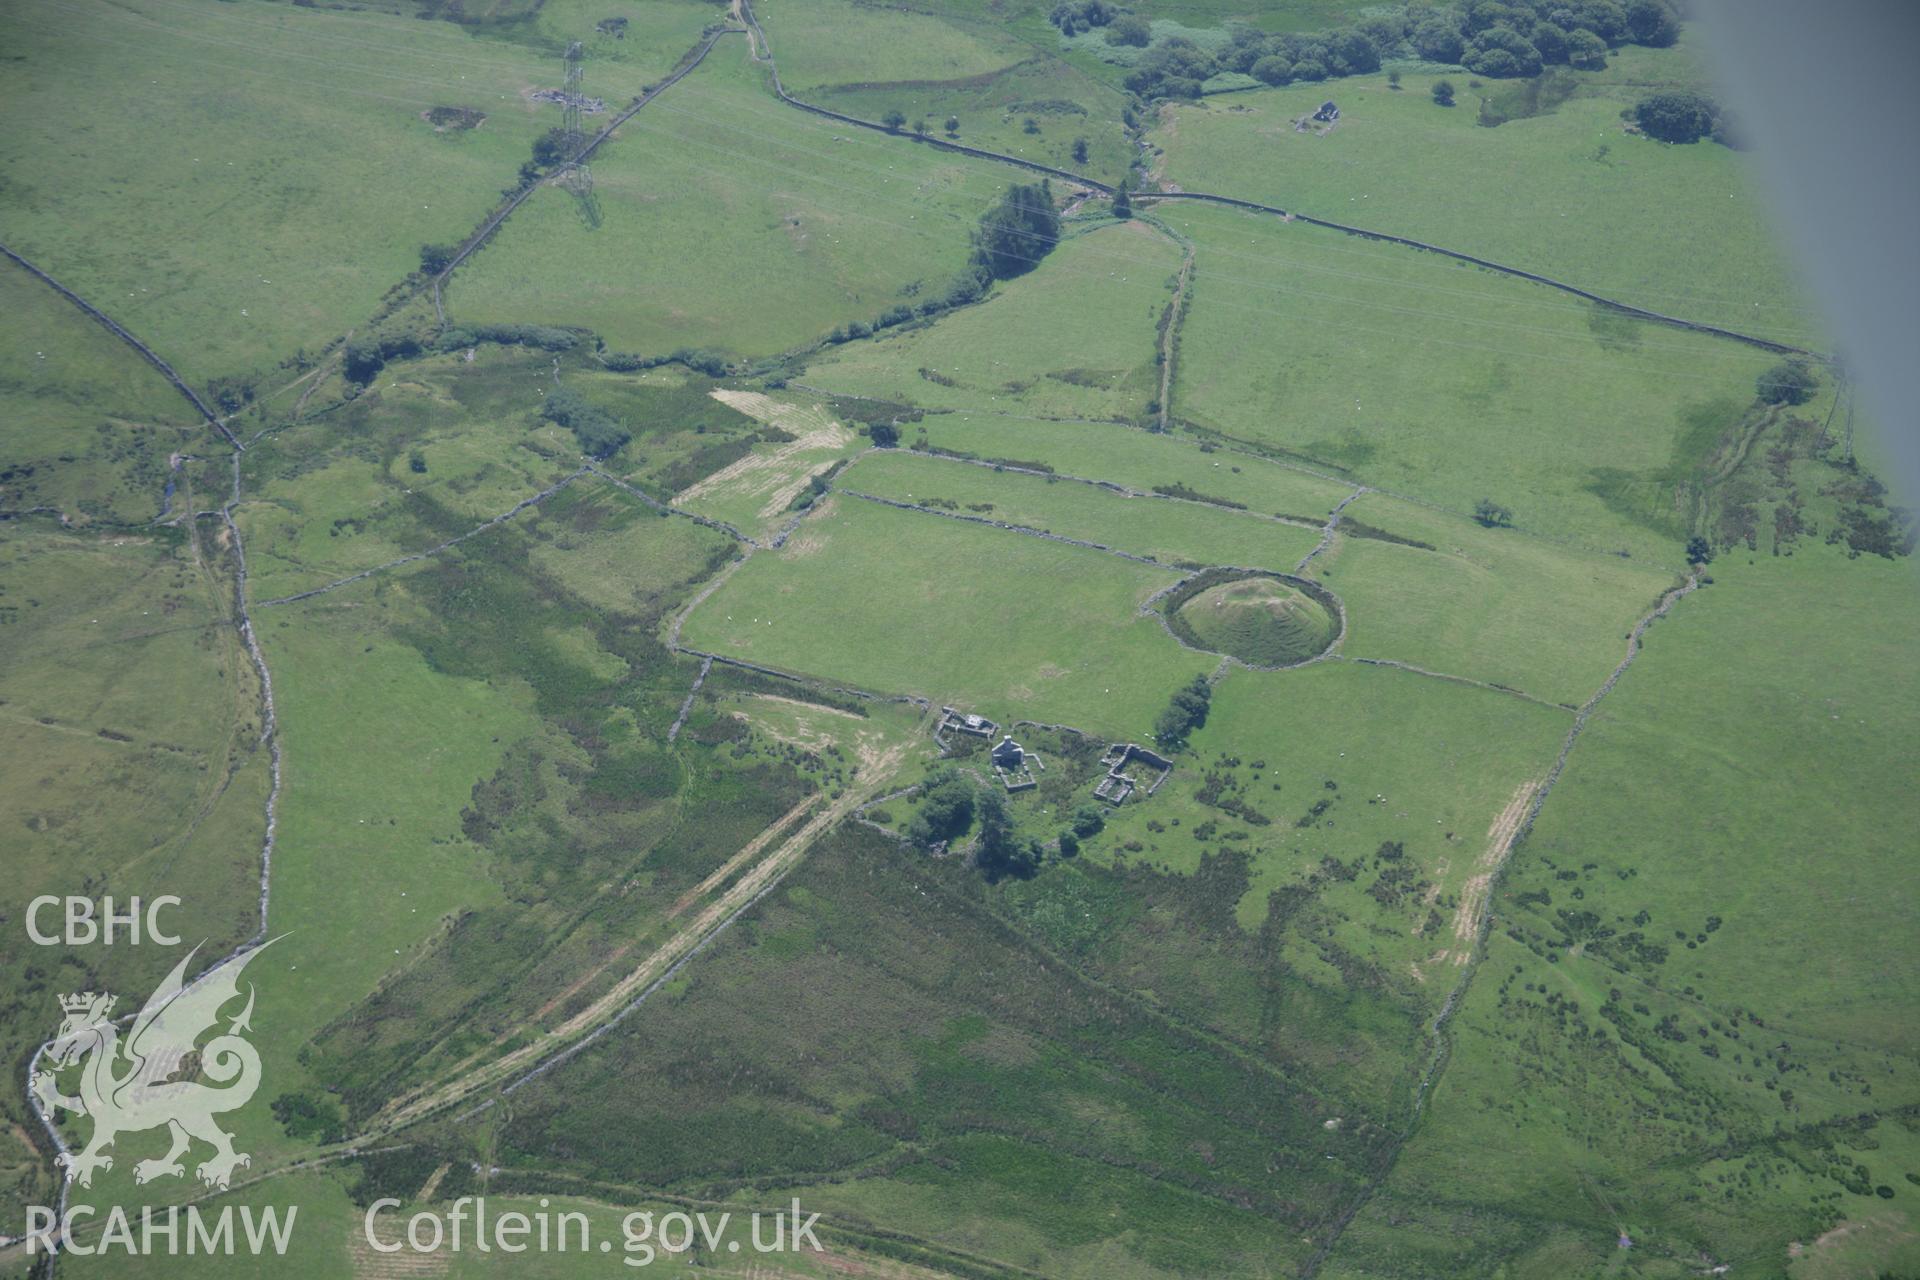 RCAHMW colour oblique aerial photograph of Tomen y Mur Roman Military Settlement. Taken on 18 July 2006 by Toby Driver.